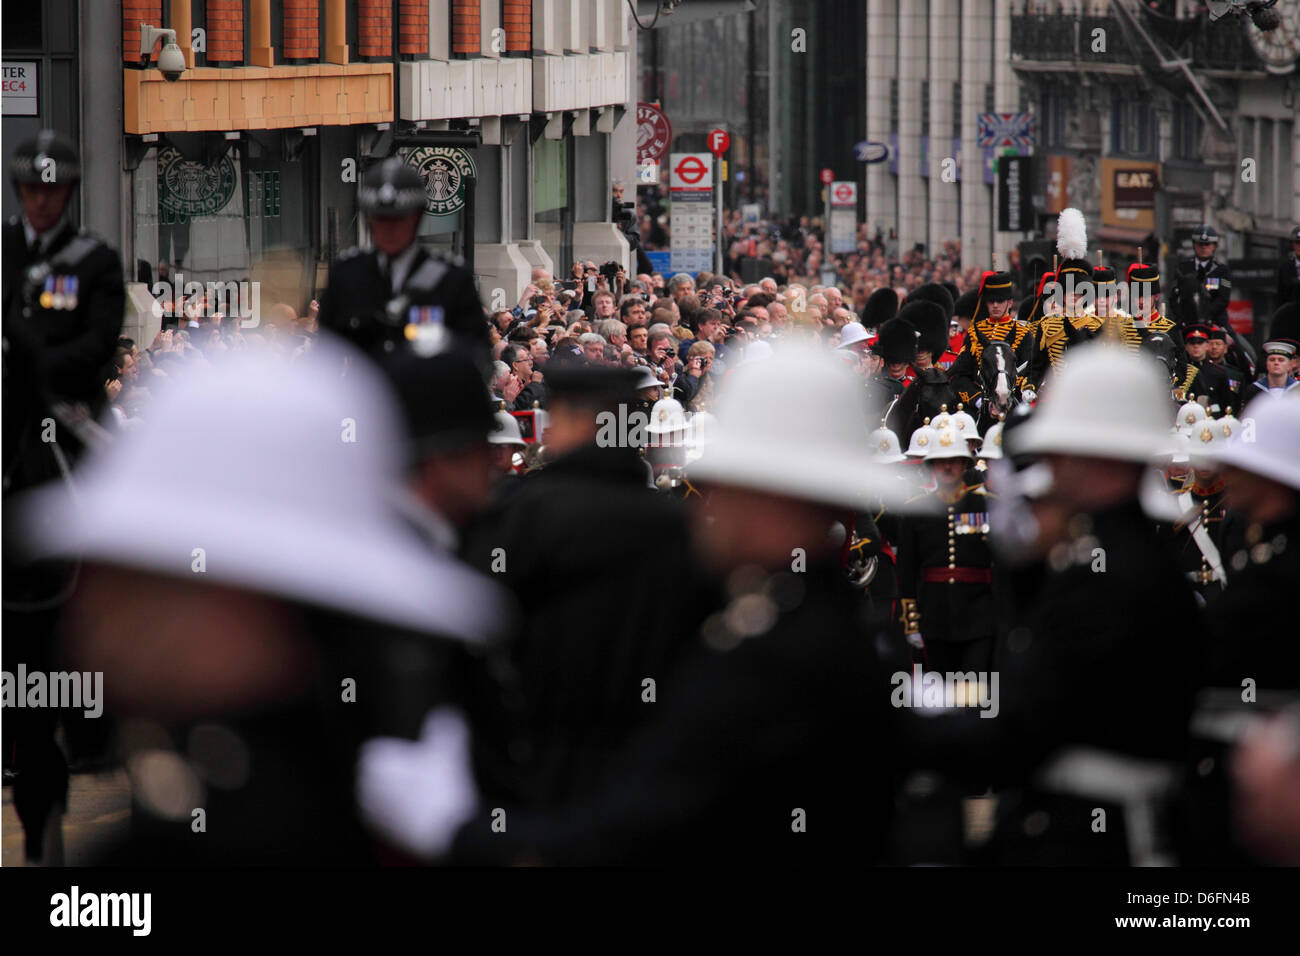 London, UK. 17th April 2013. The funeral procession of Margaret Thatcher in London, England. Baroness Thatcher (1925 - 2013) was a stateswoman and the prime minister of the United Kingdom from 1979 to 1991. Credit: whyeyephotography.com/Alamy Live News Stock Photo